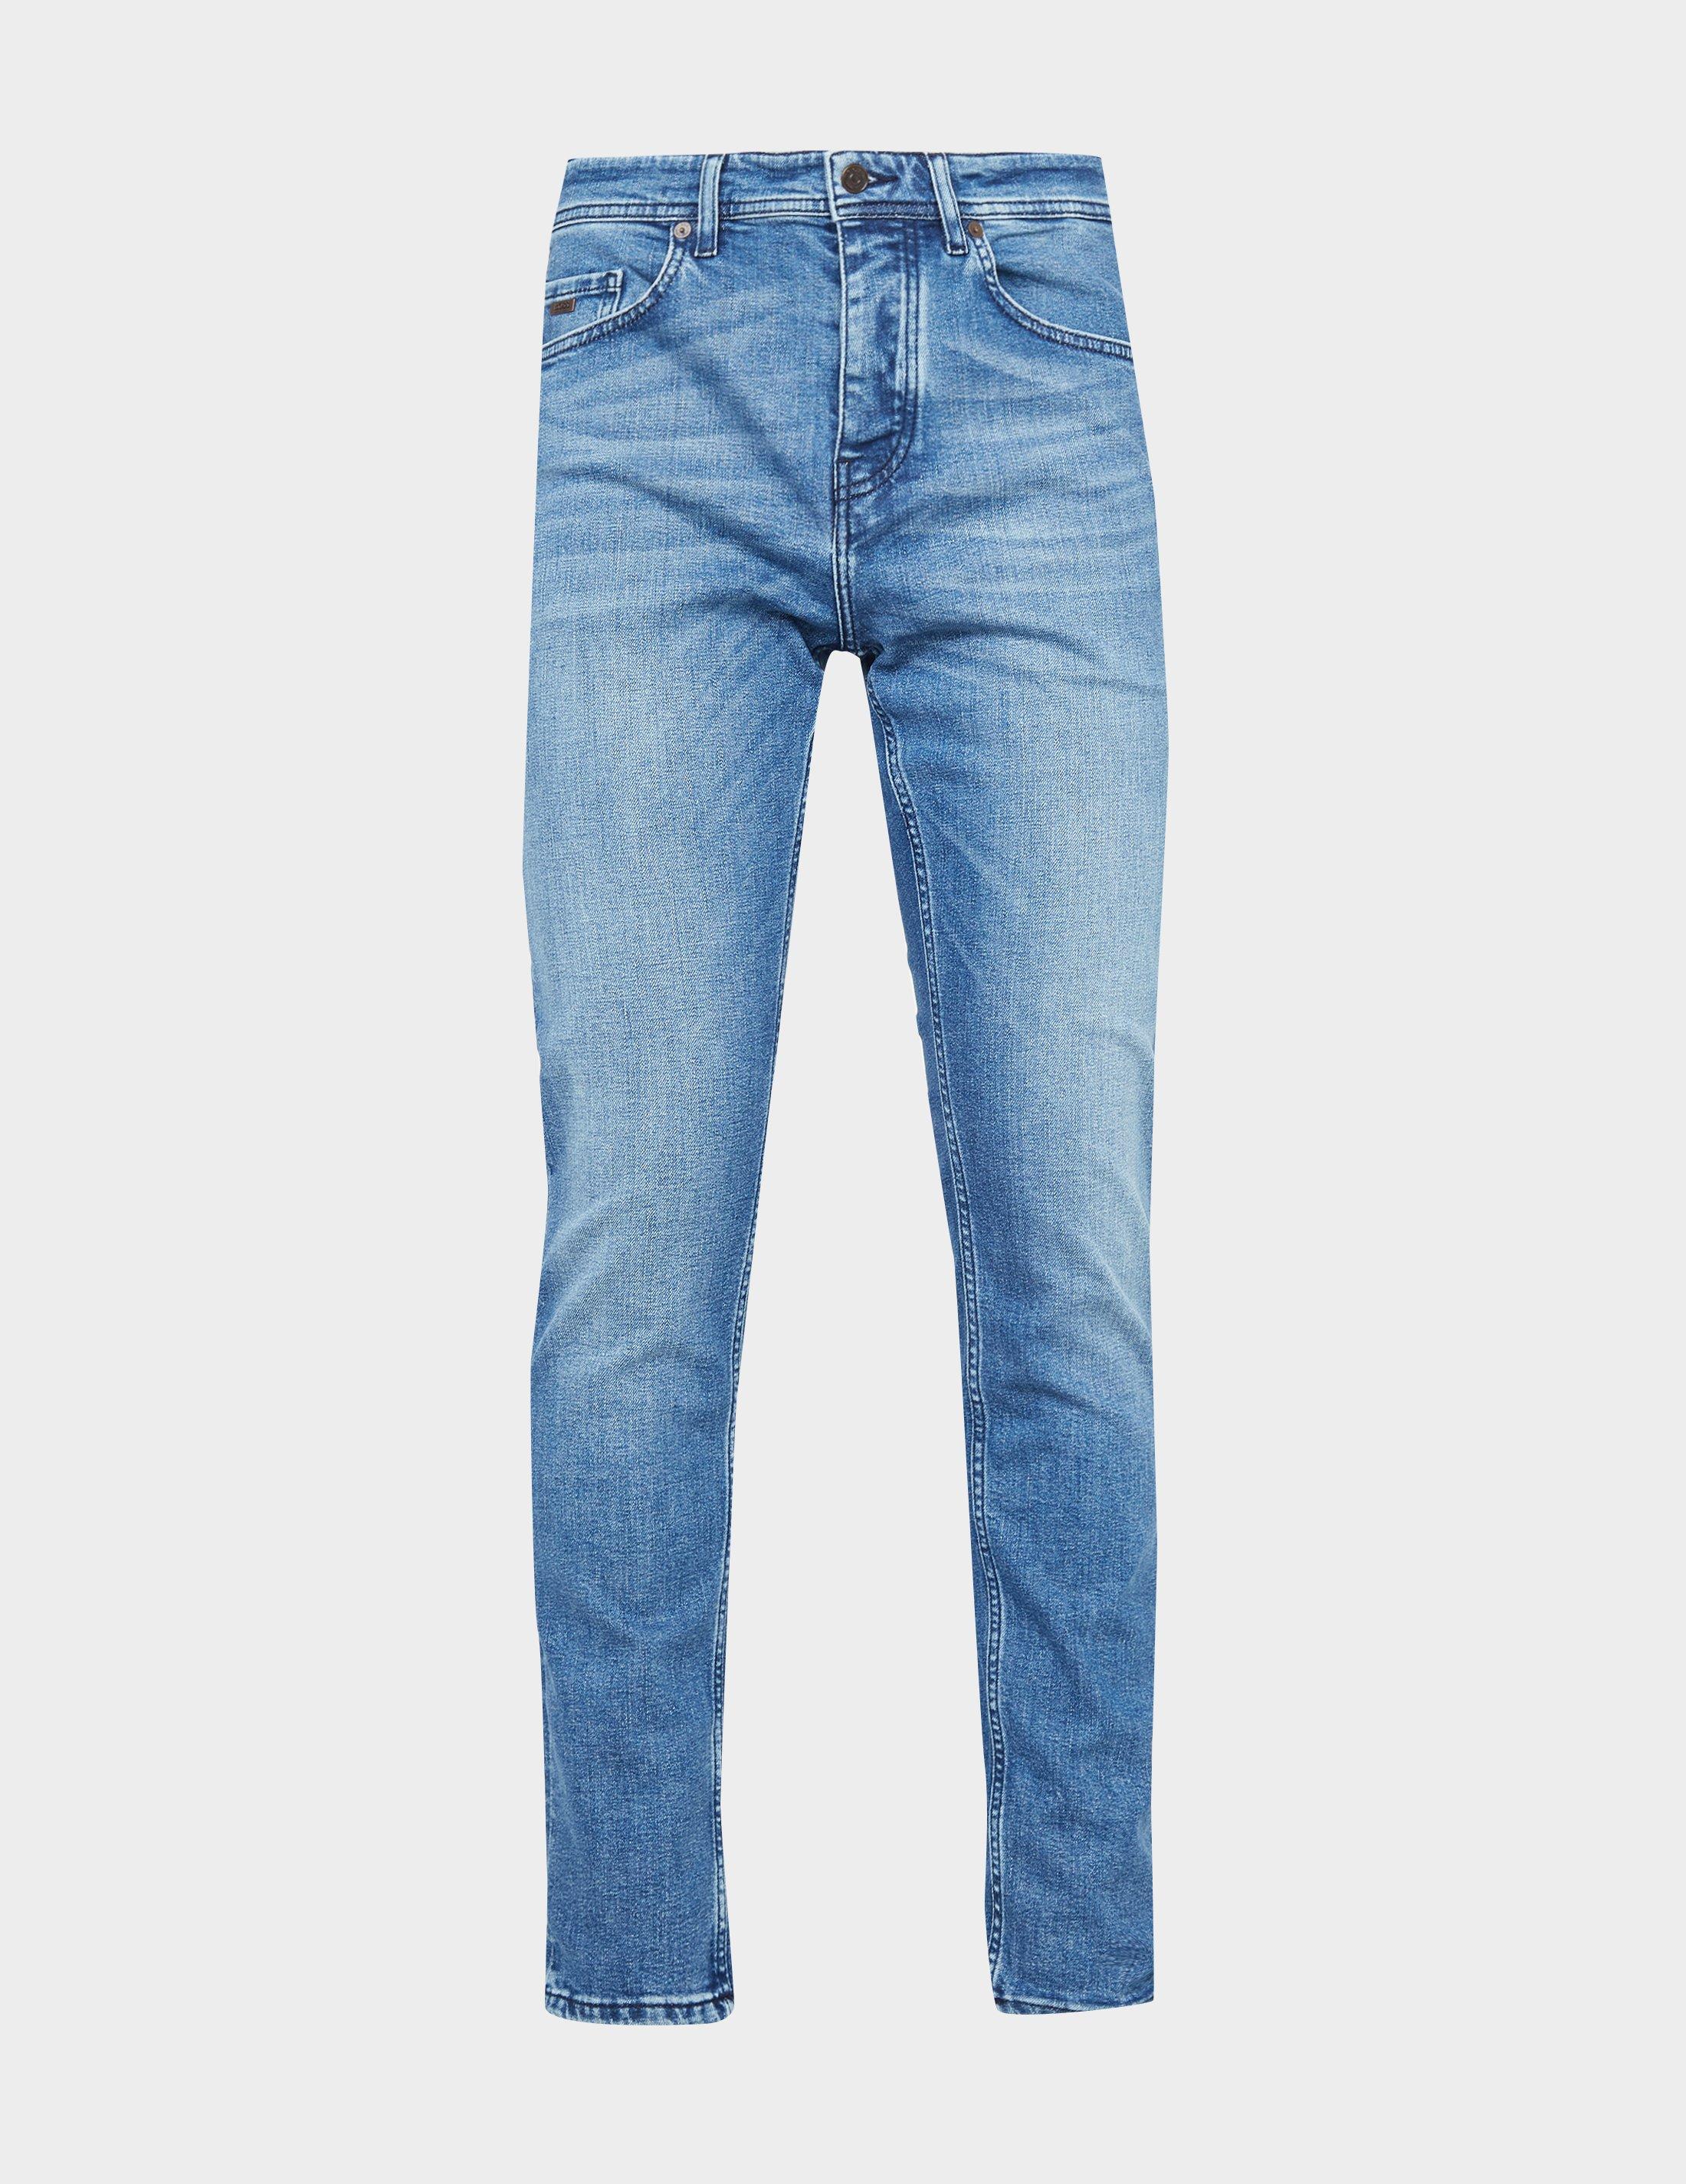 Blue BOSS Taber Stretch Tapered Jeans 